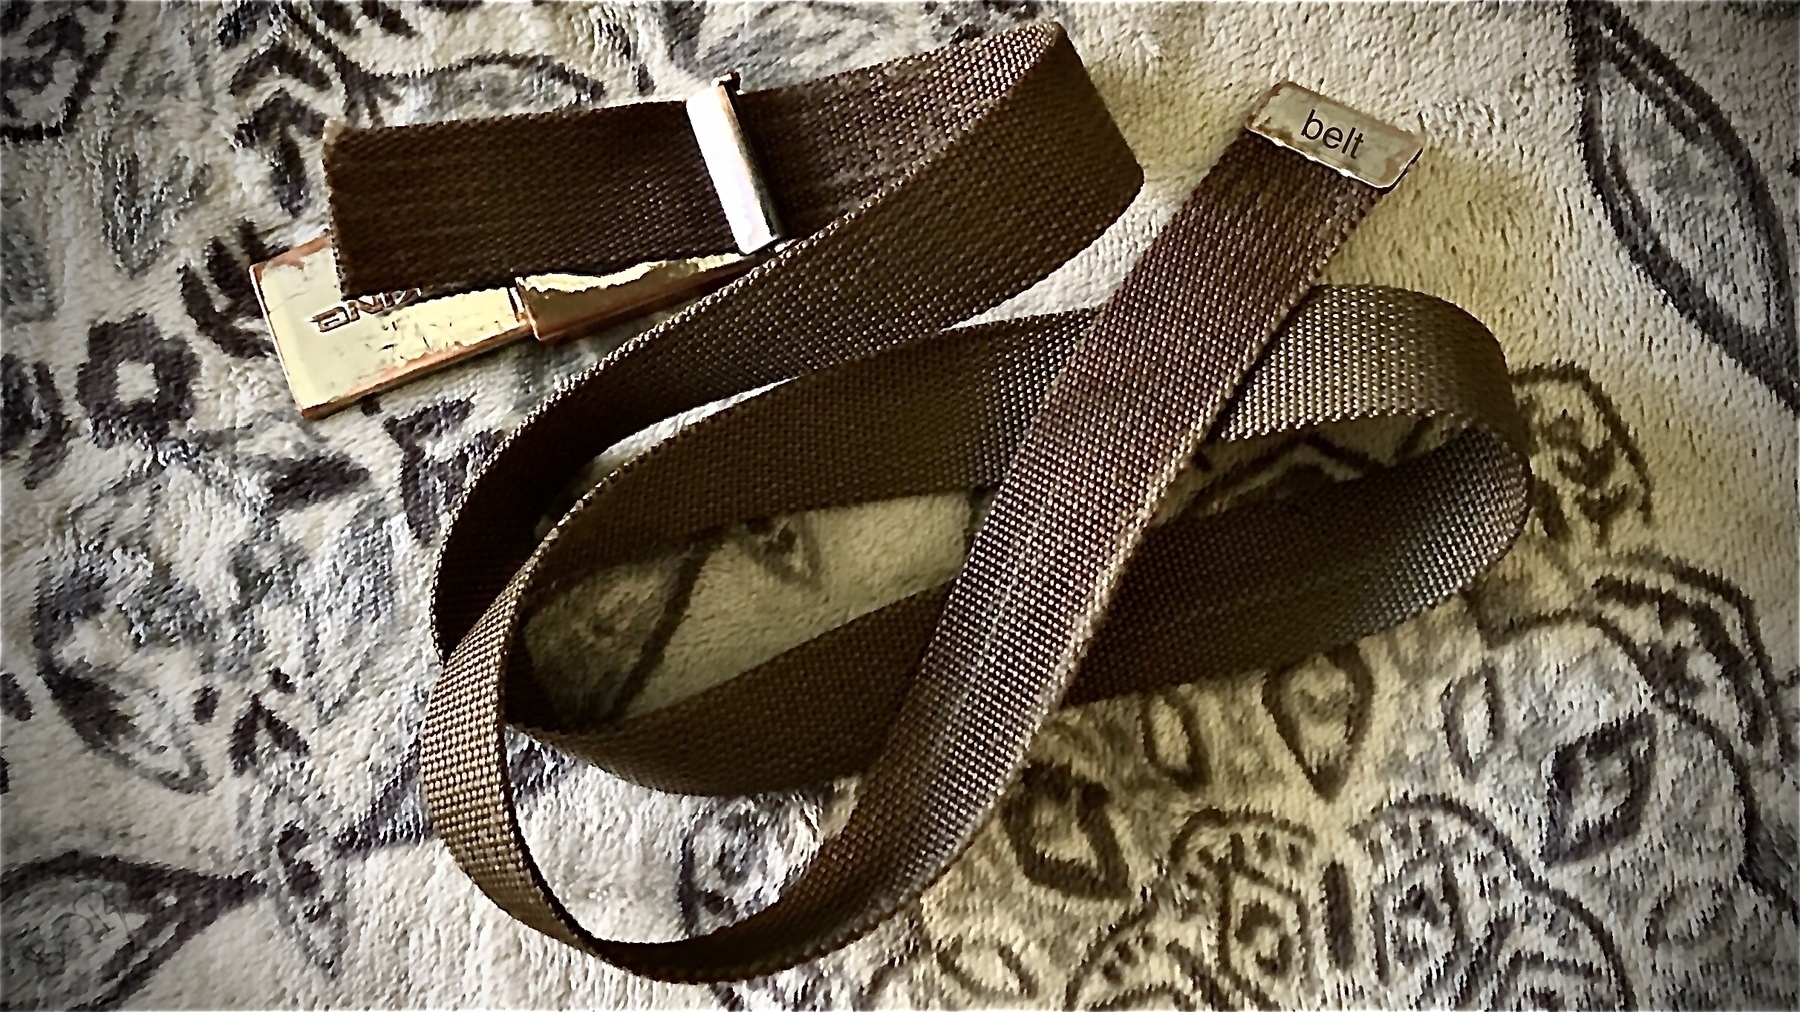 Old web belt with well worn *Dakine* slide buckle and tip